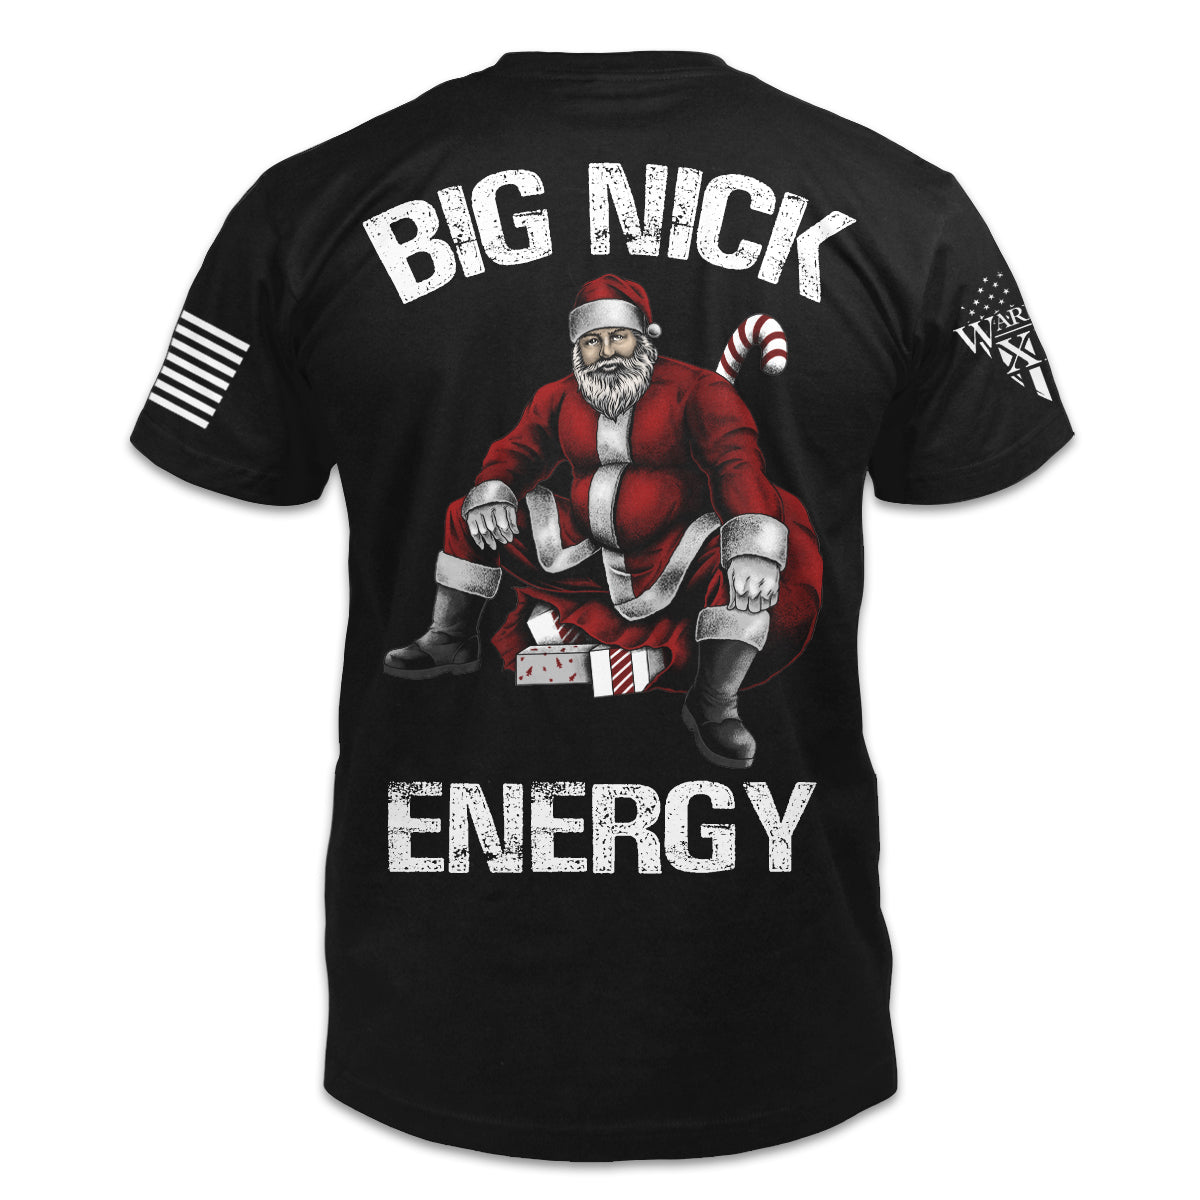 A black t-shirt with an image on the back of Santa Claus sitting on a bag of presents with the words "Big Nick Energy".